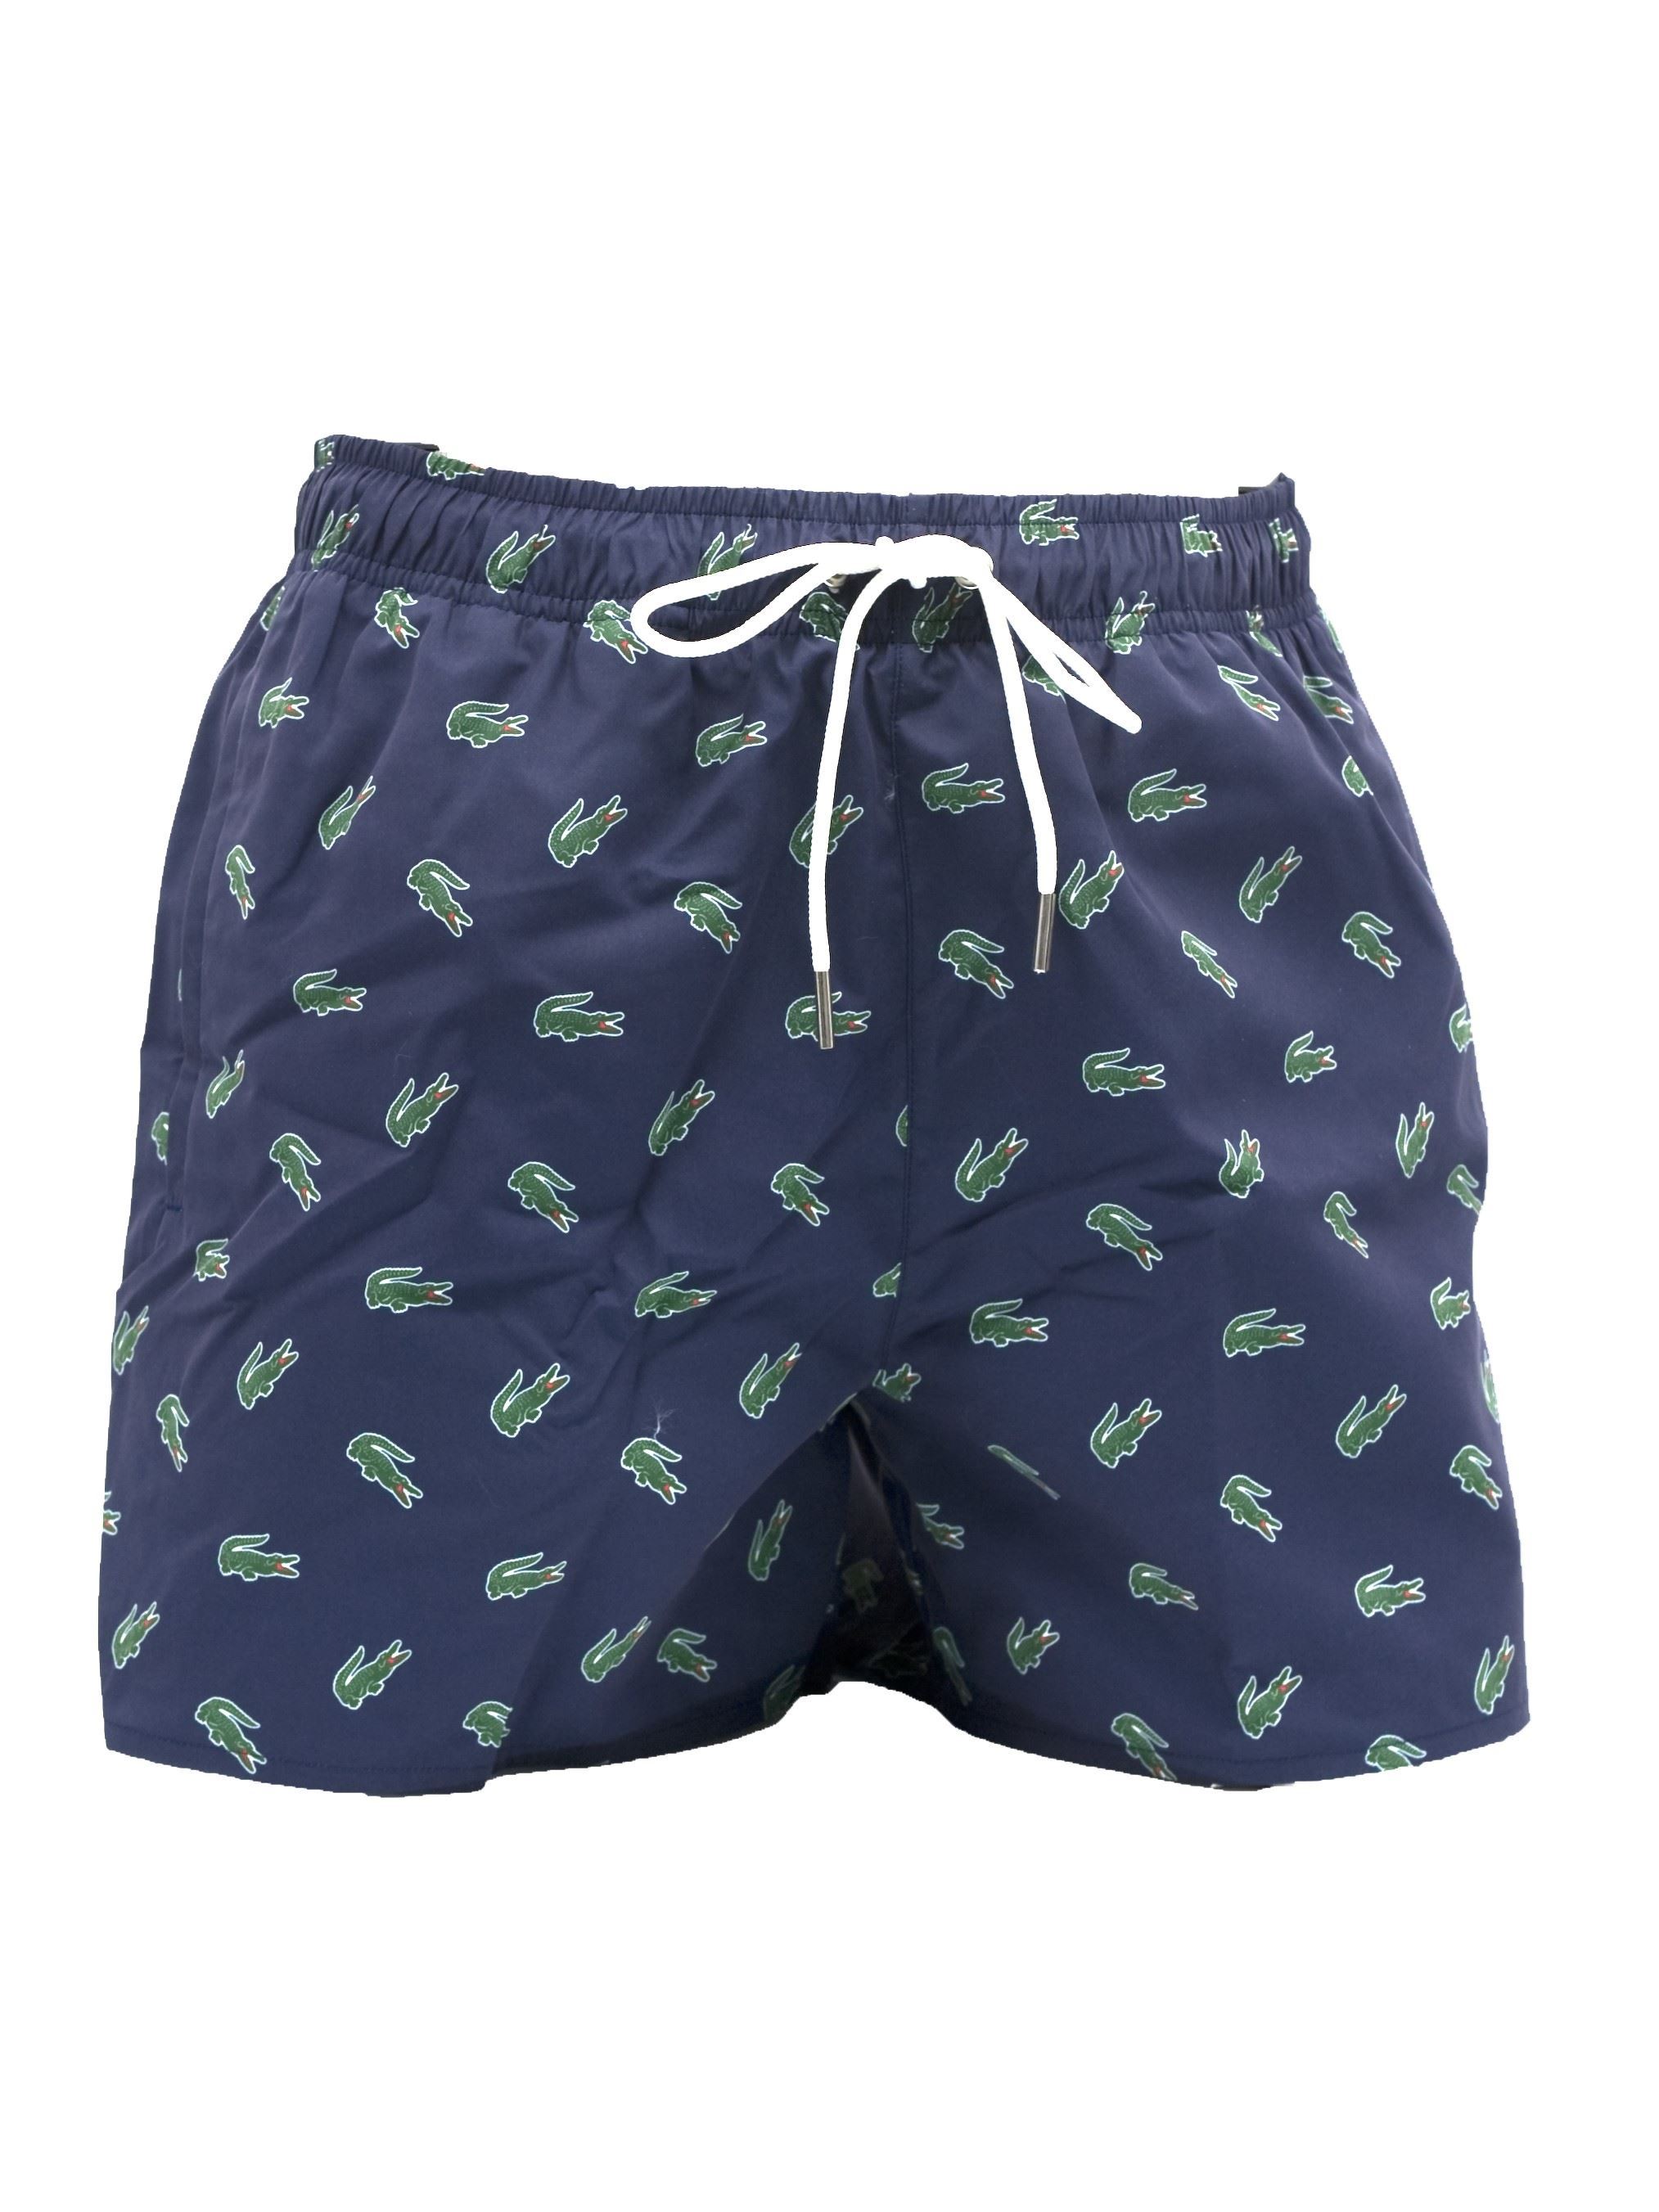 Picture of Patterned swim shorts with a blue background